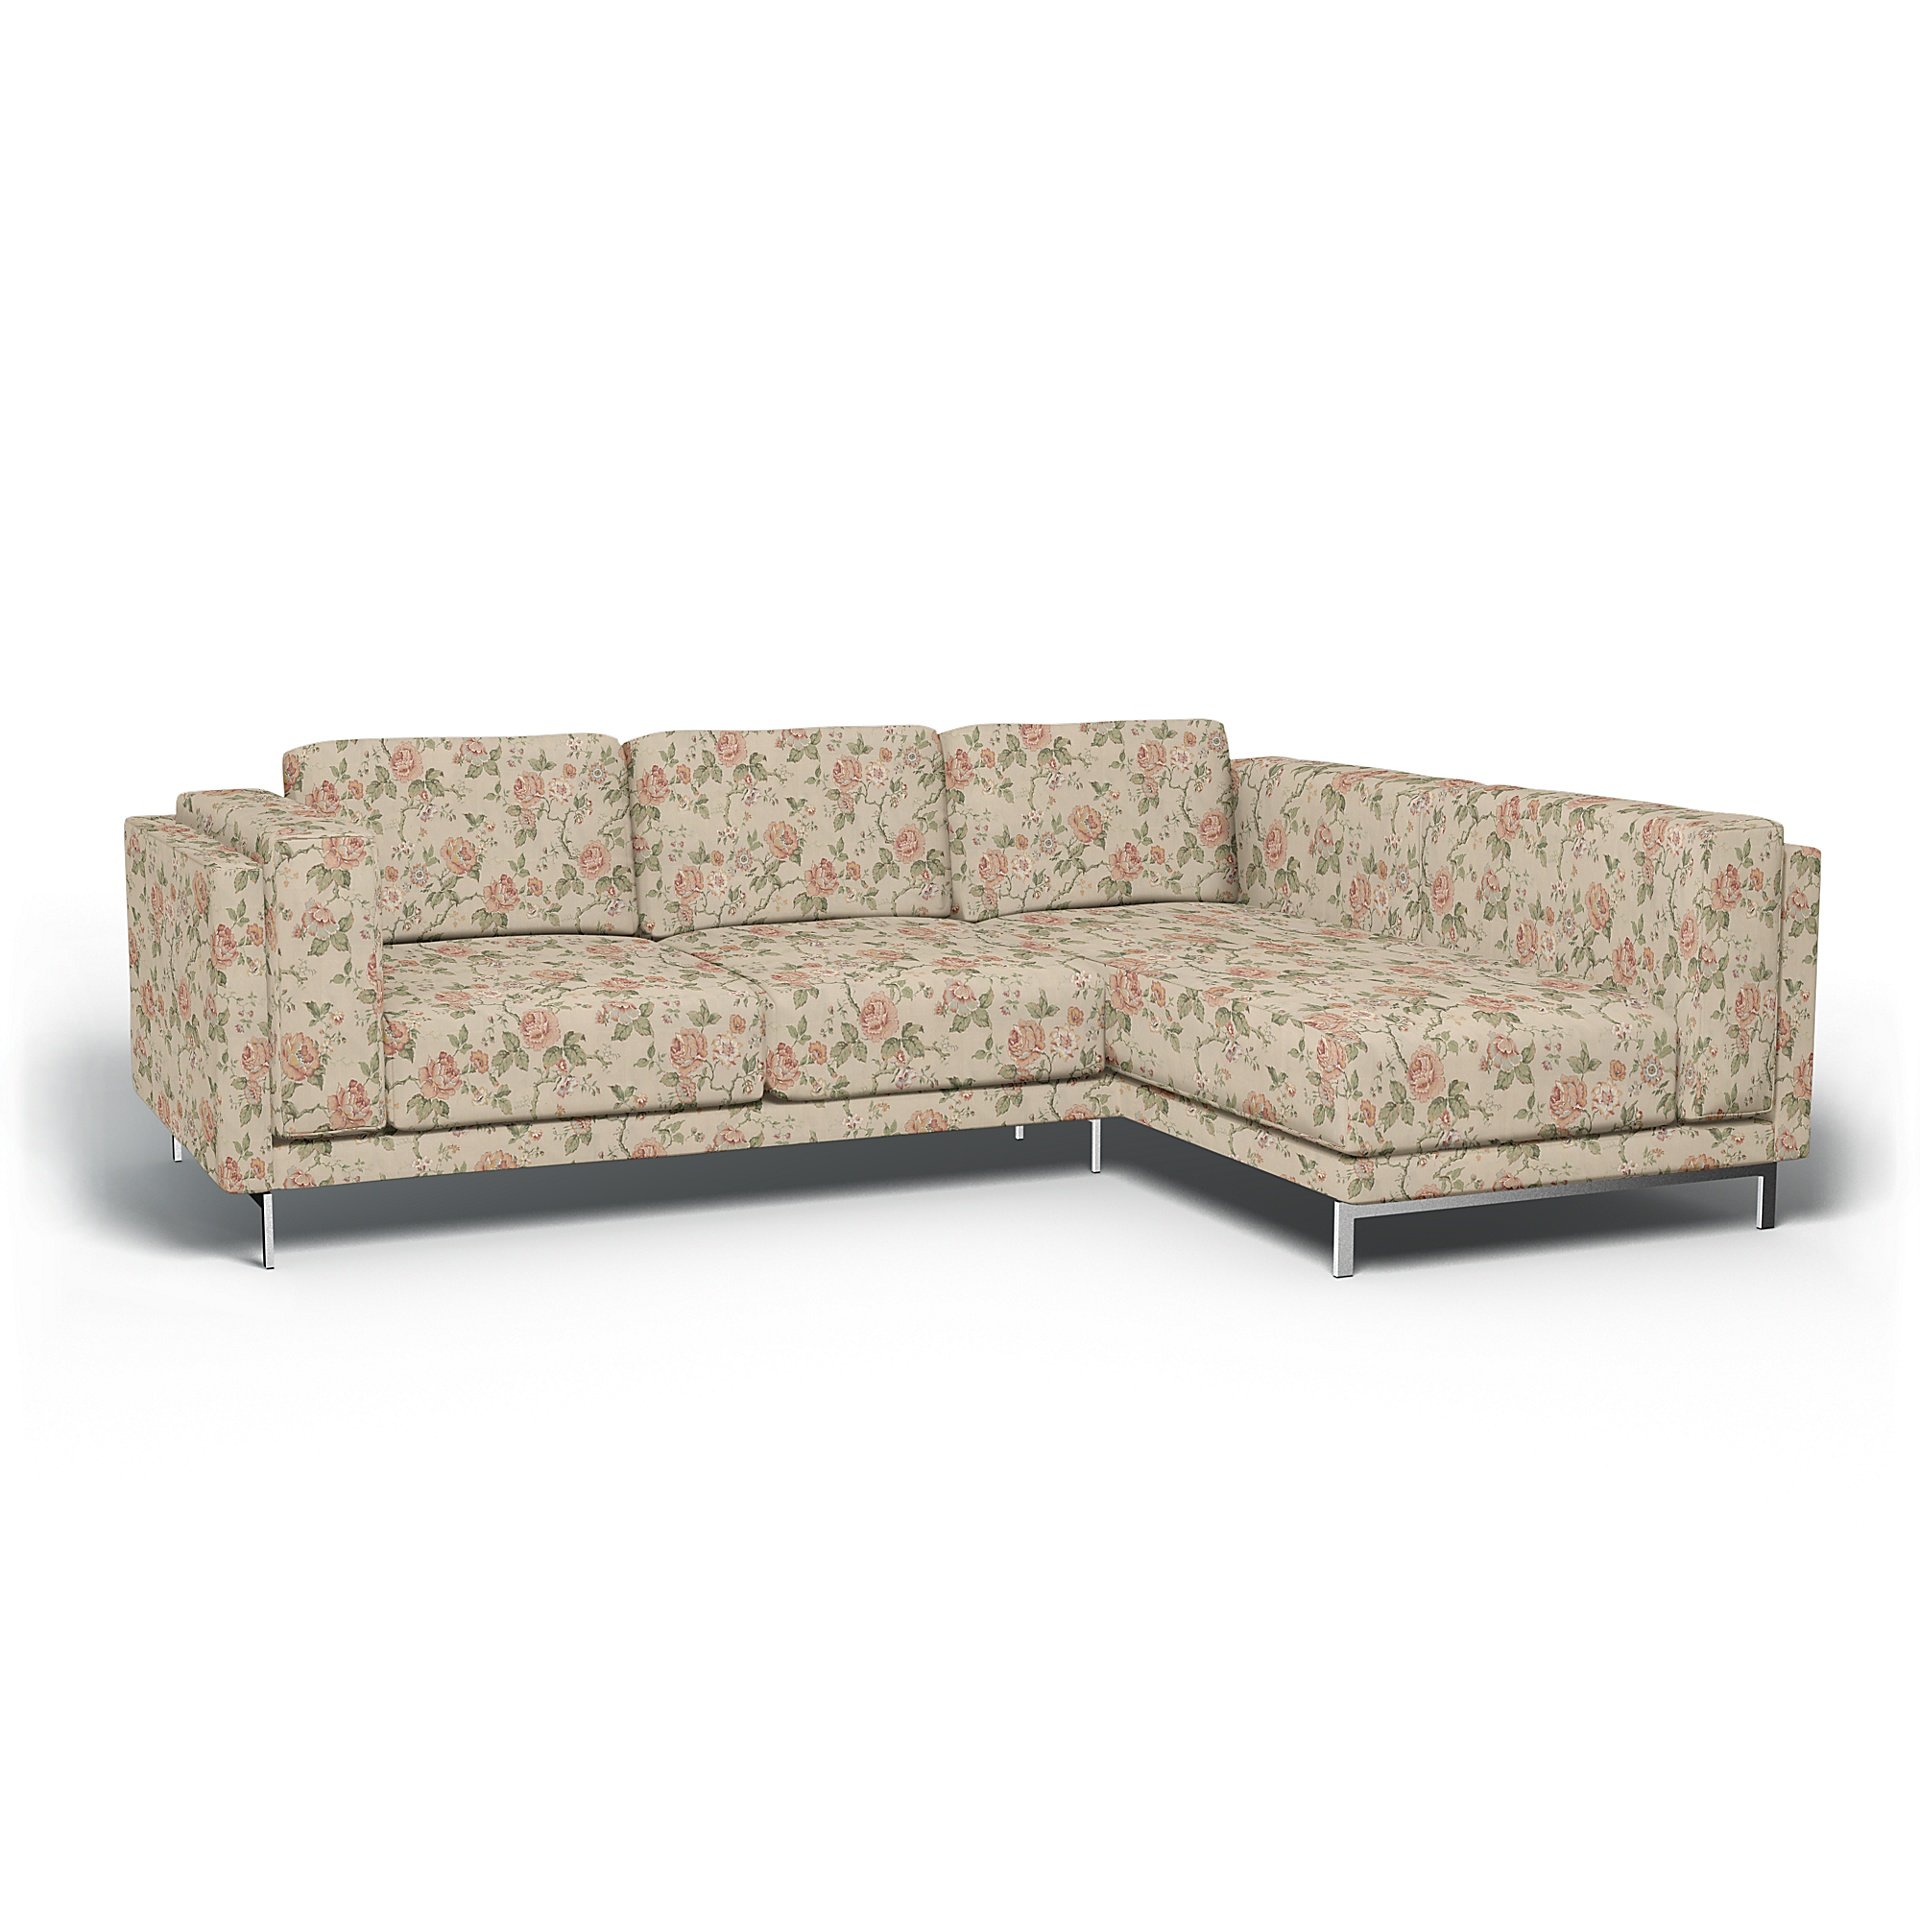 IKEA - Nockeby 3 Seat Sofa with Right Chaise Cover, Rosentrad Light, BEMZ x BORASTAPETER COLLECTION 